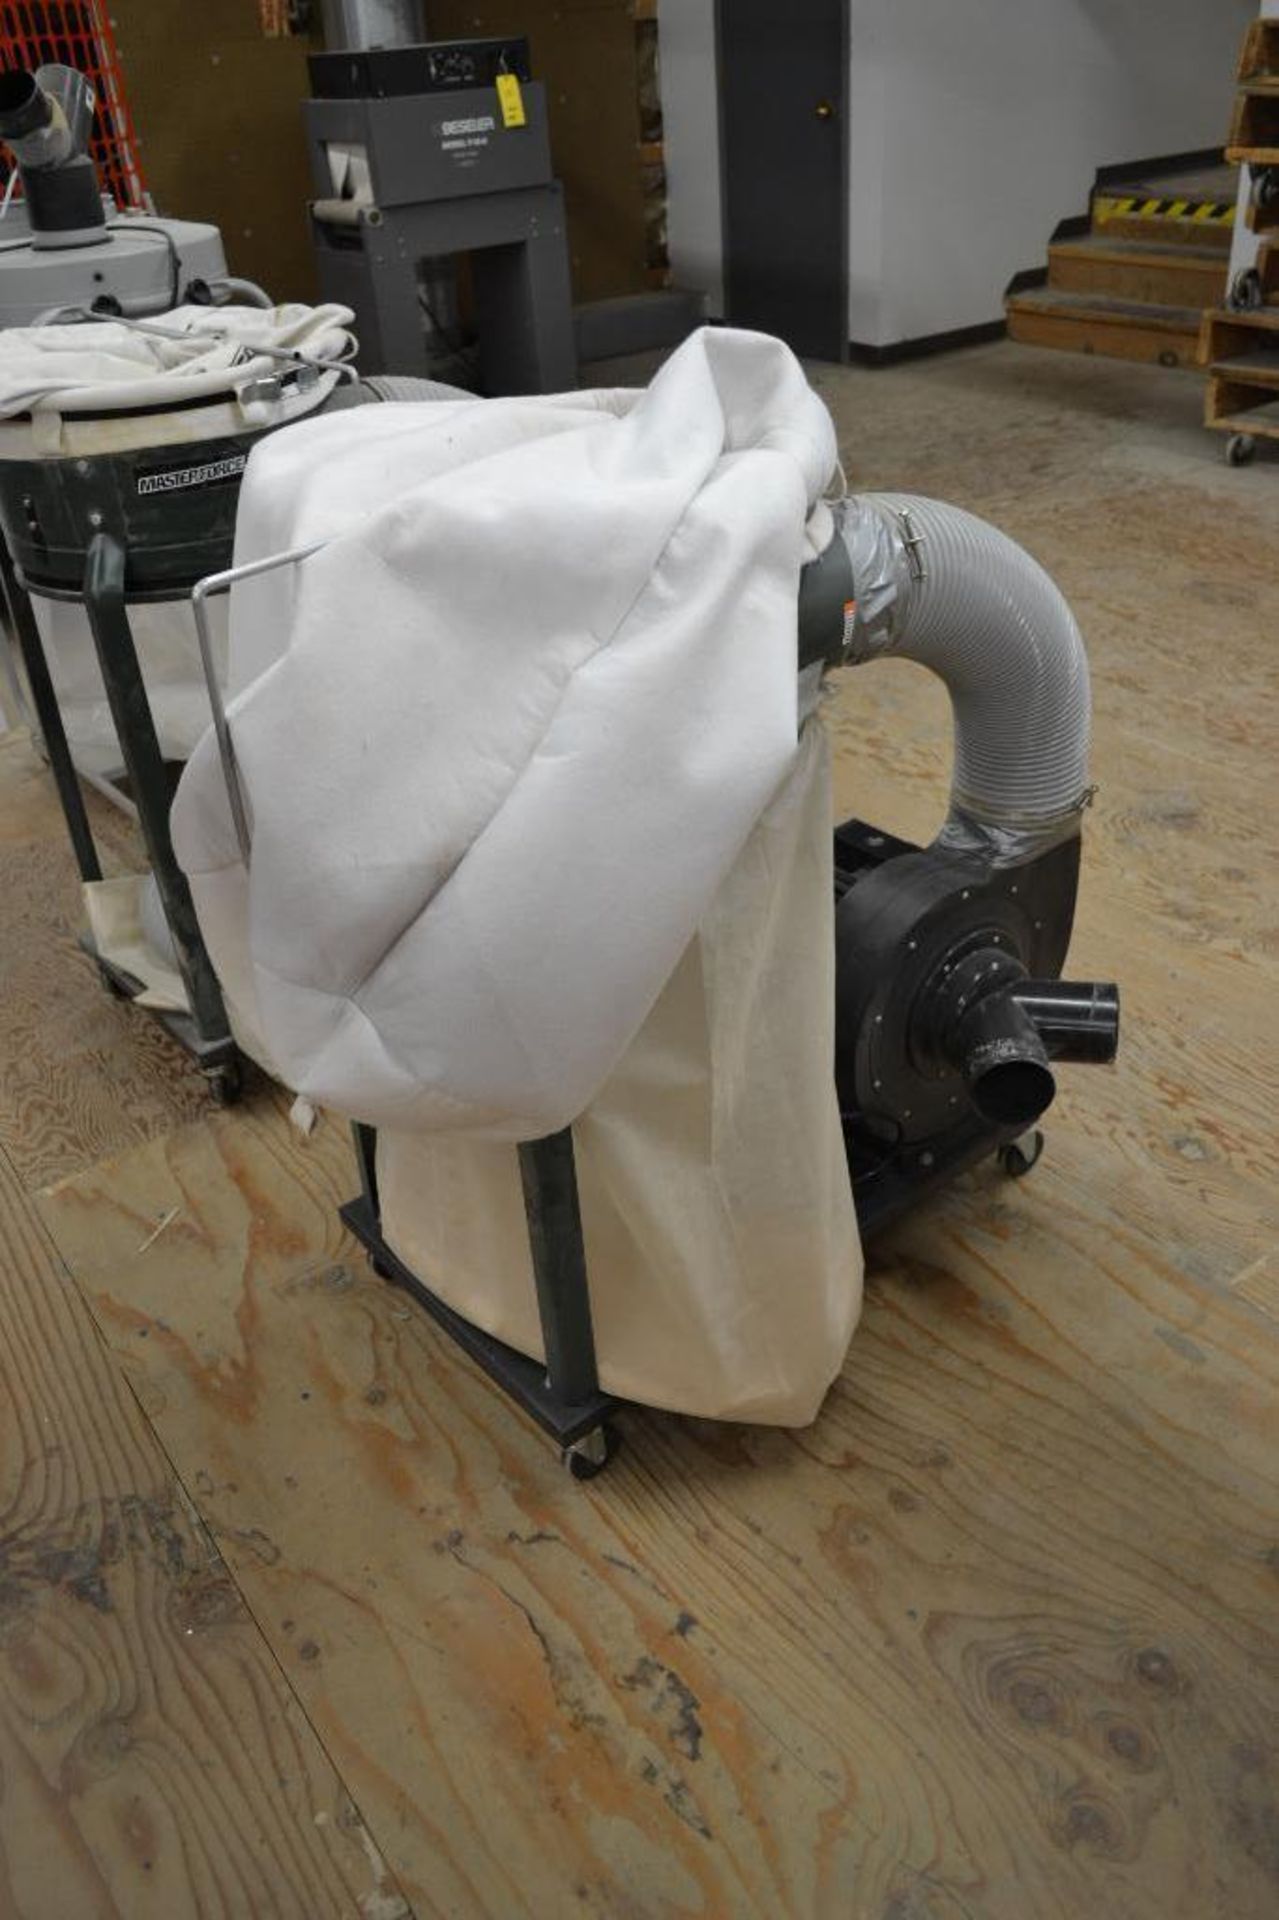 Masterforce 1200 CFM, 1.5 HP Portable Dust Collector Model 240-0050, S/N 201-004 - Image 2 of 2